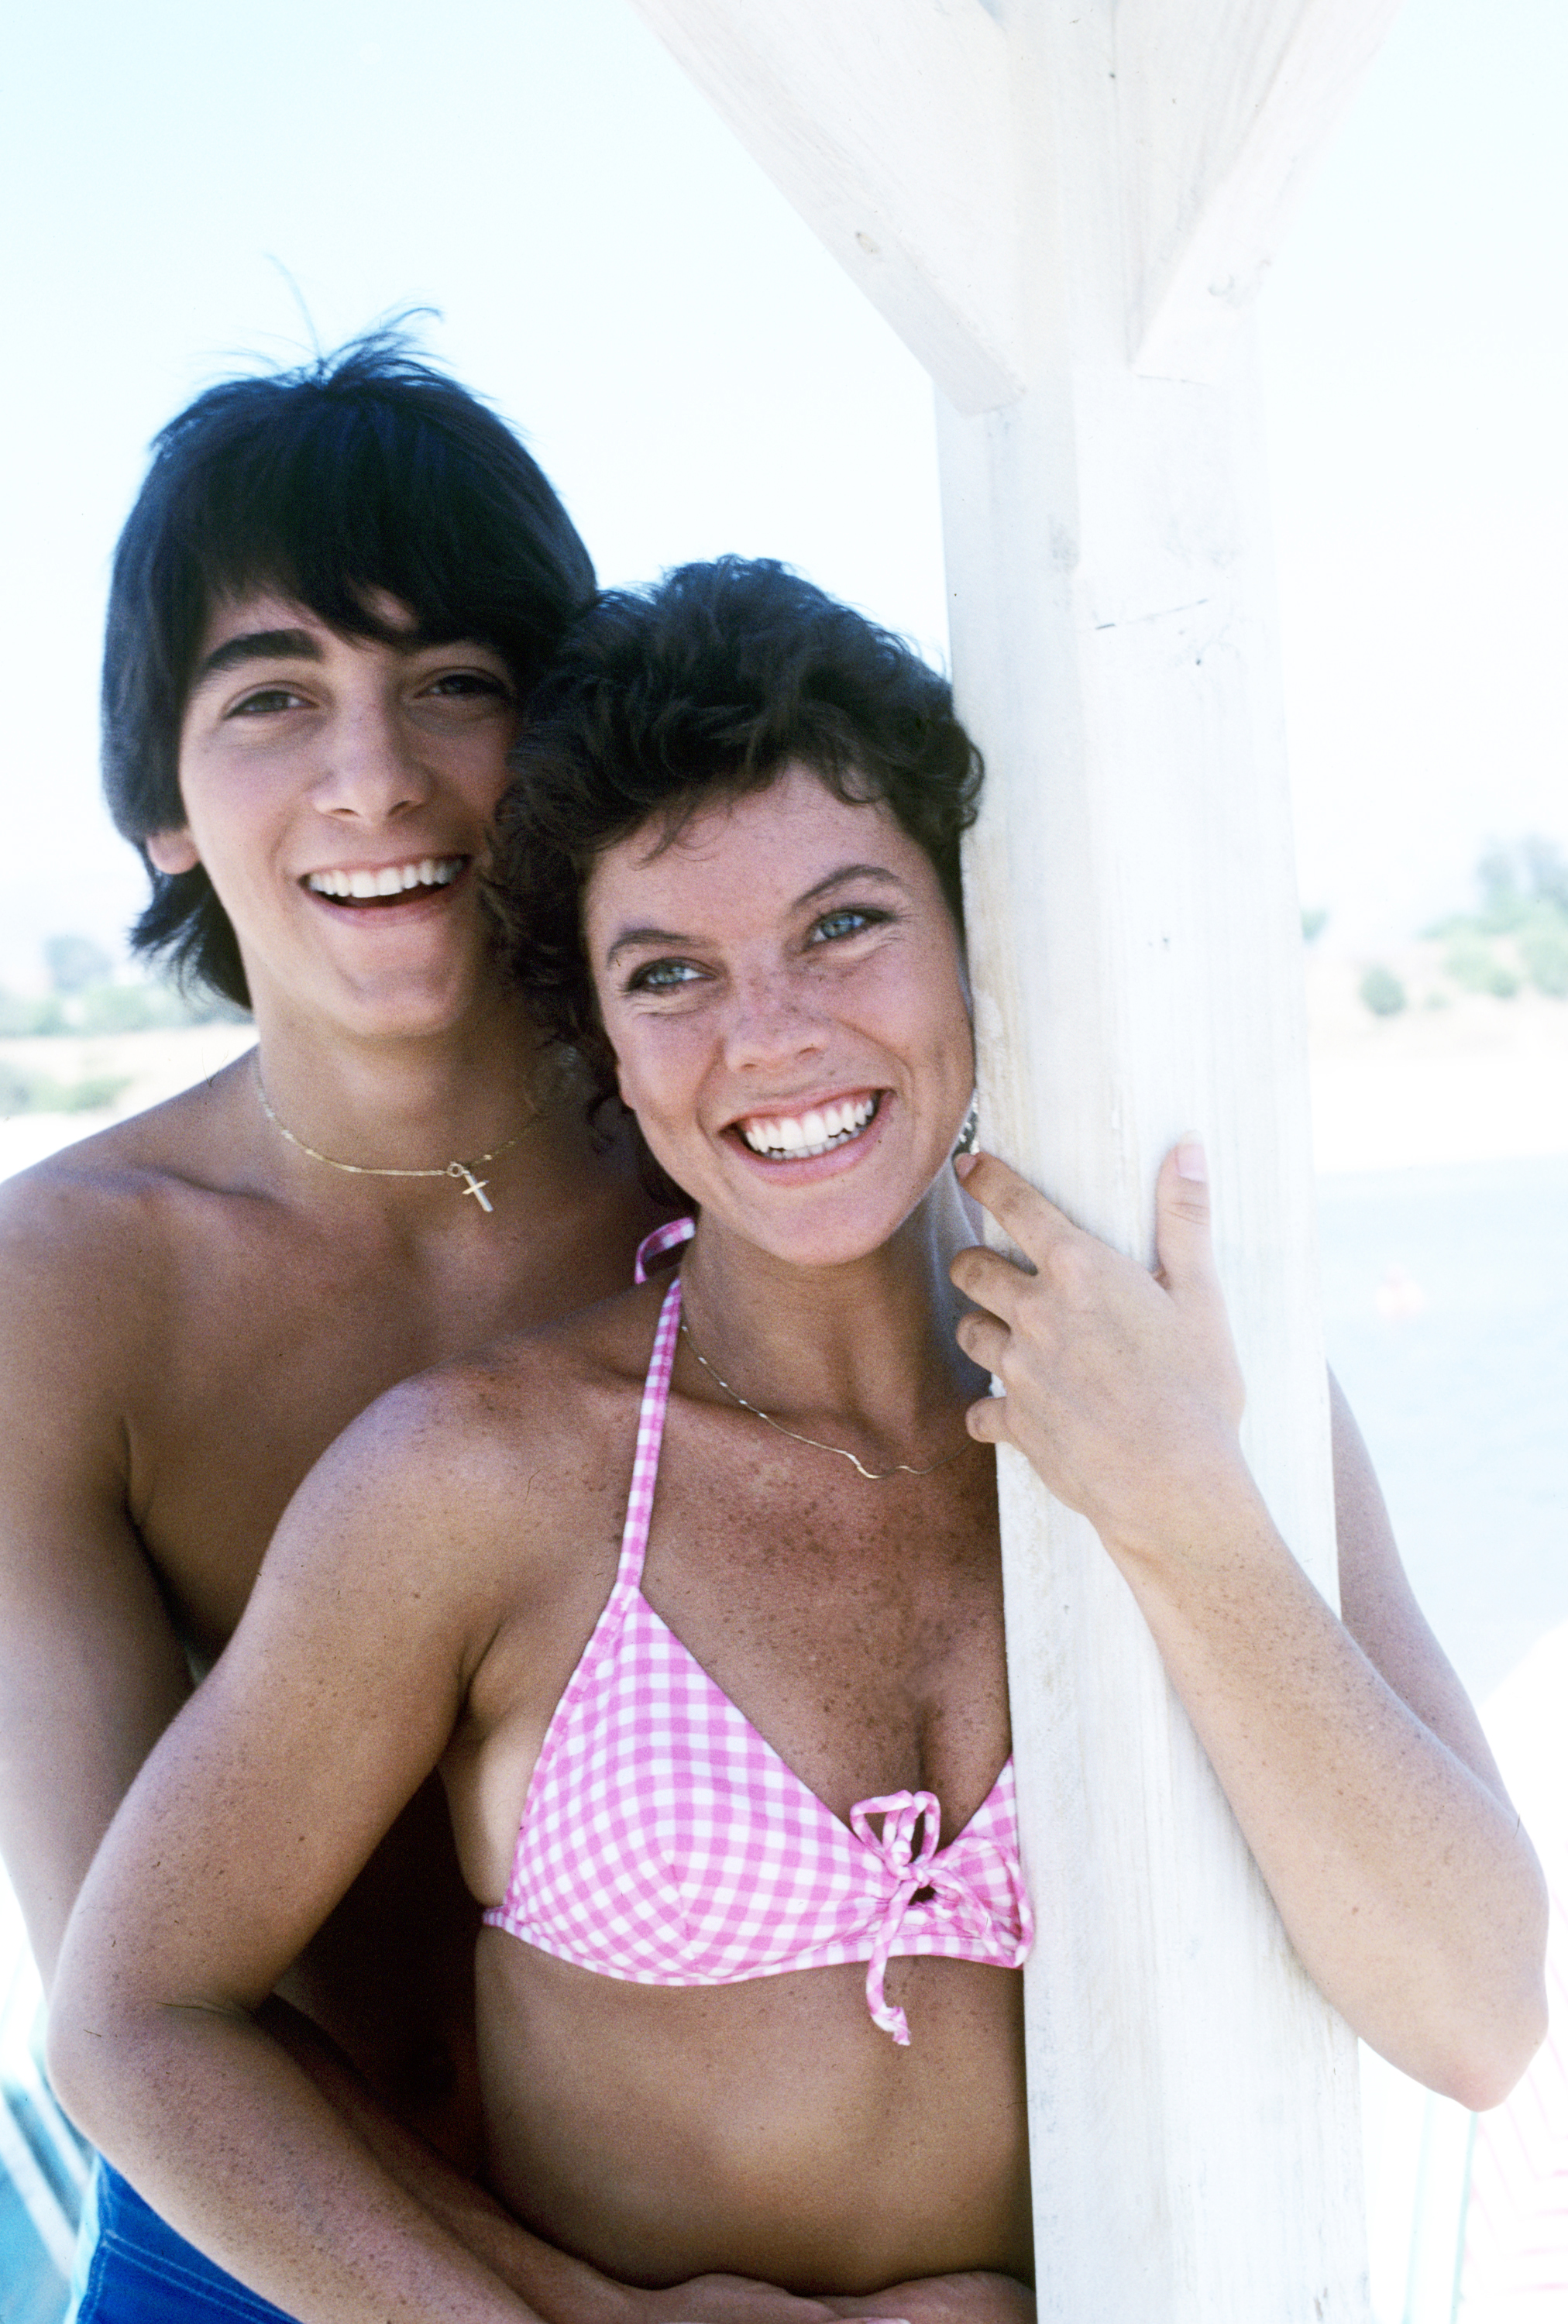 Actor Scott Baio and actress Erin Moran on the set of "Happy Days" on October 6, 1981 | Source: Getty Images